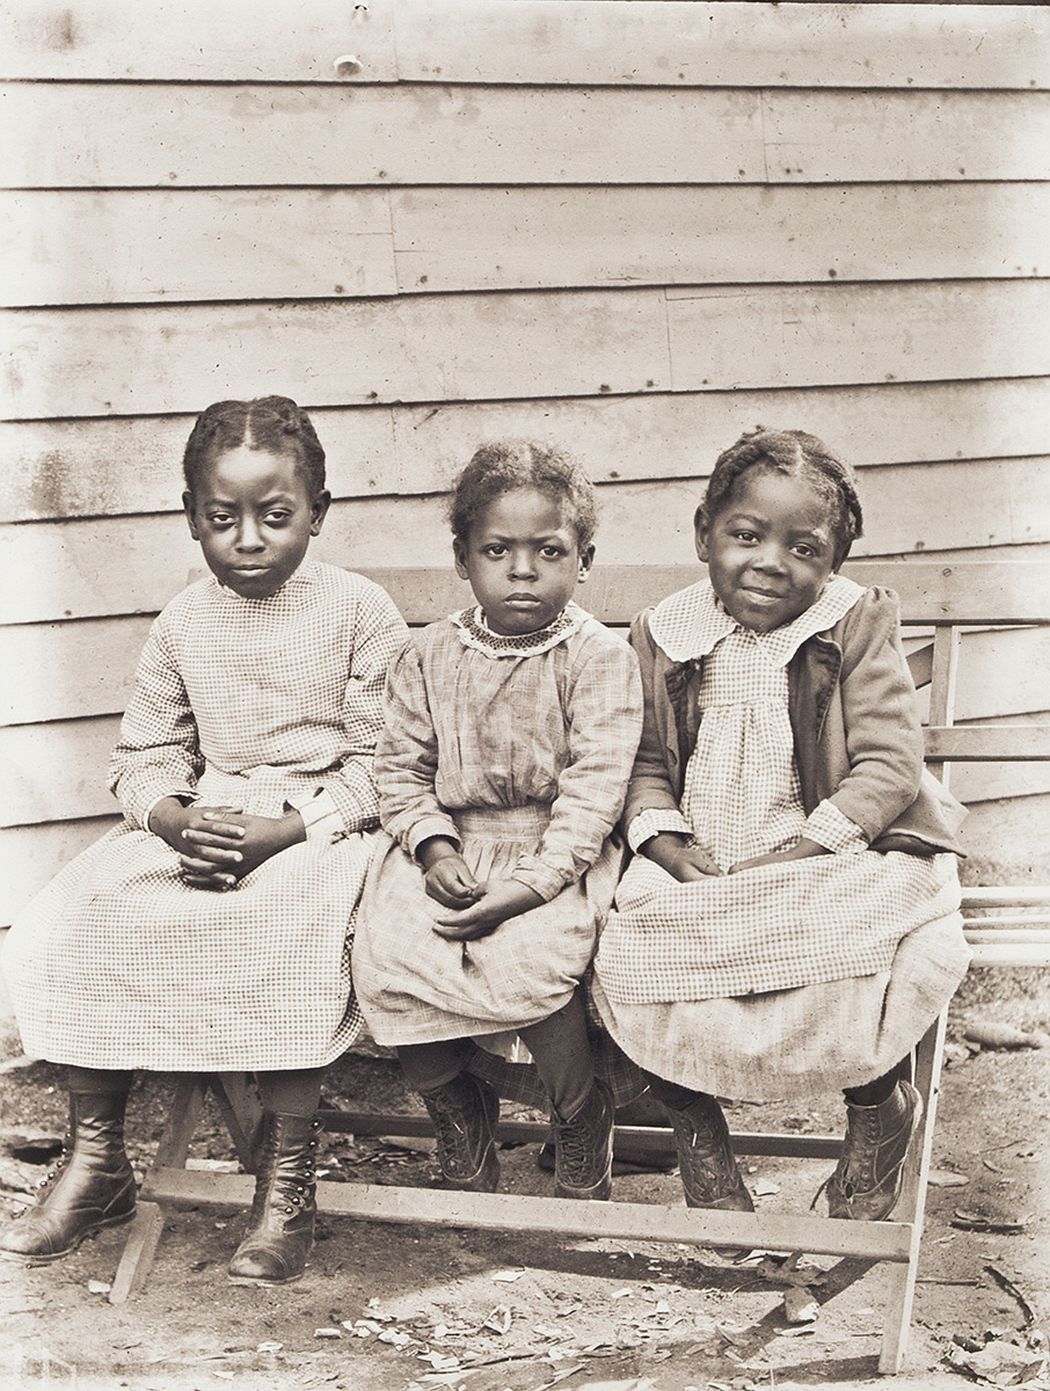 Portrait of Lillian, Cora and Luvenia Ward, about 1900, printed 2016, archival inkjet print, E.132.16.62 Lillian, Luvenia, and Cora Ward were the daughters of former slaves William H. and Arries Ann Ward, from eastern North Carolina. After defending his wife from an attempted rape by a white man, William fled north to Pomfret, Connecticut, where Arries Ann joined him in 1889. They subsequently moved to Worcester and parented eleven children.